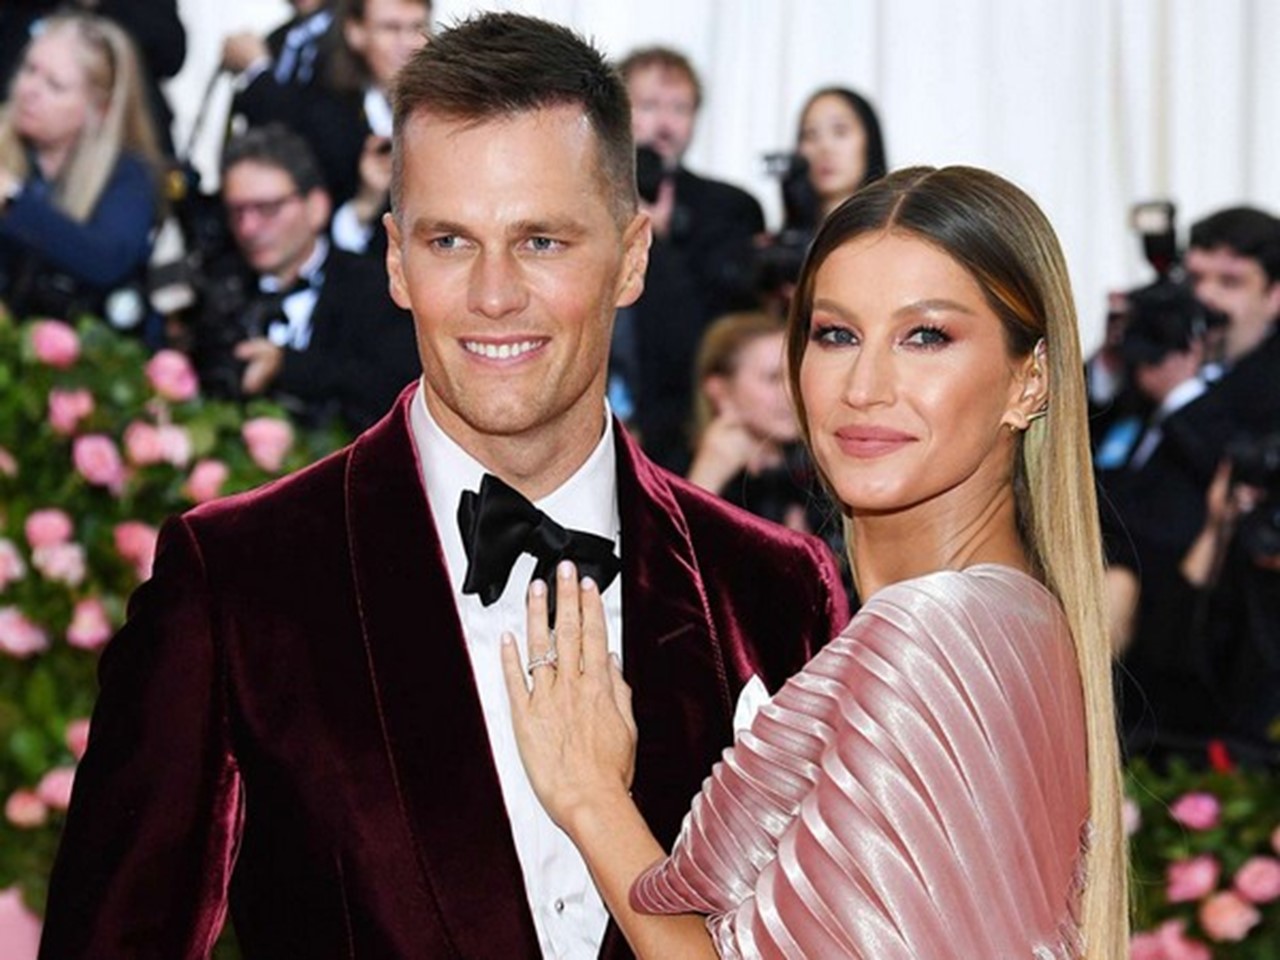 Gisele Bundchen opens up about the end of her marriage to Tom Brady